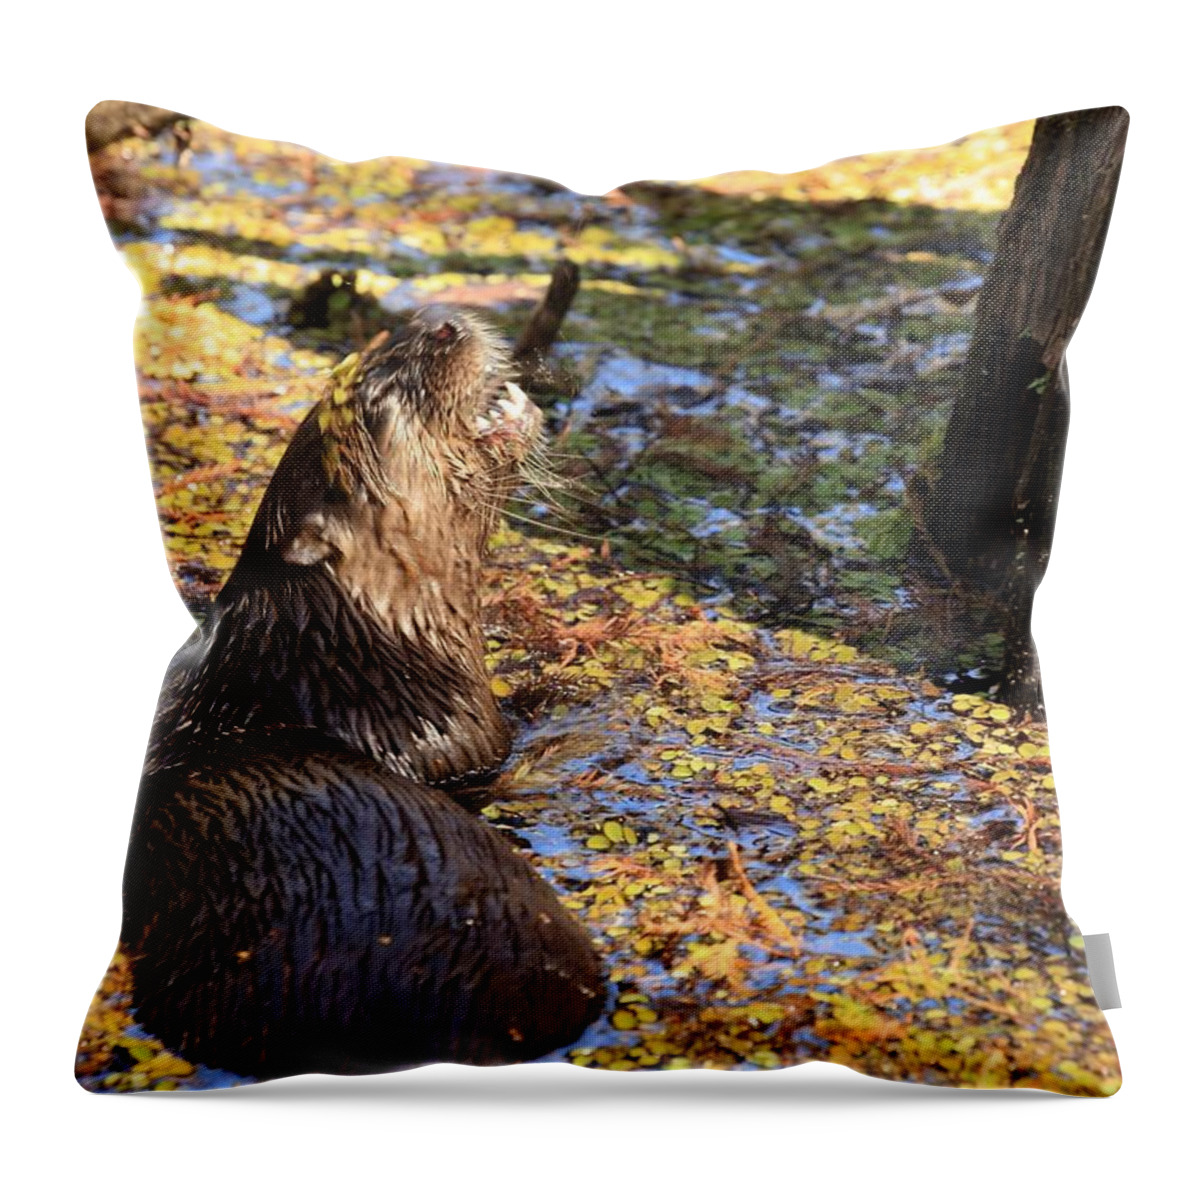 Otter Throw Pillow featuring the photograph Roaring Otter by Mingming Jiang